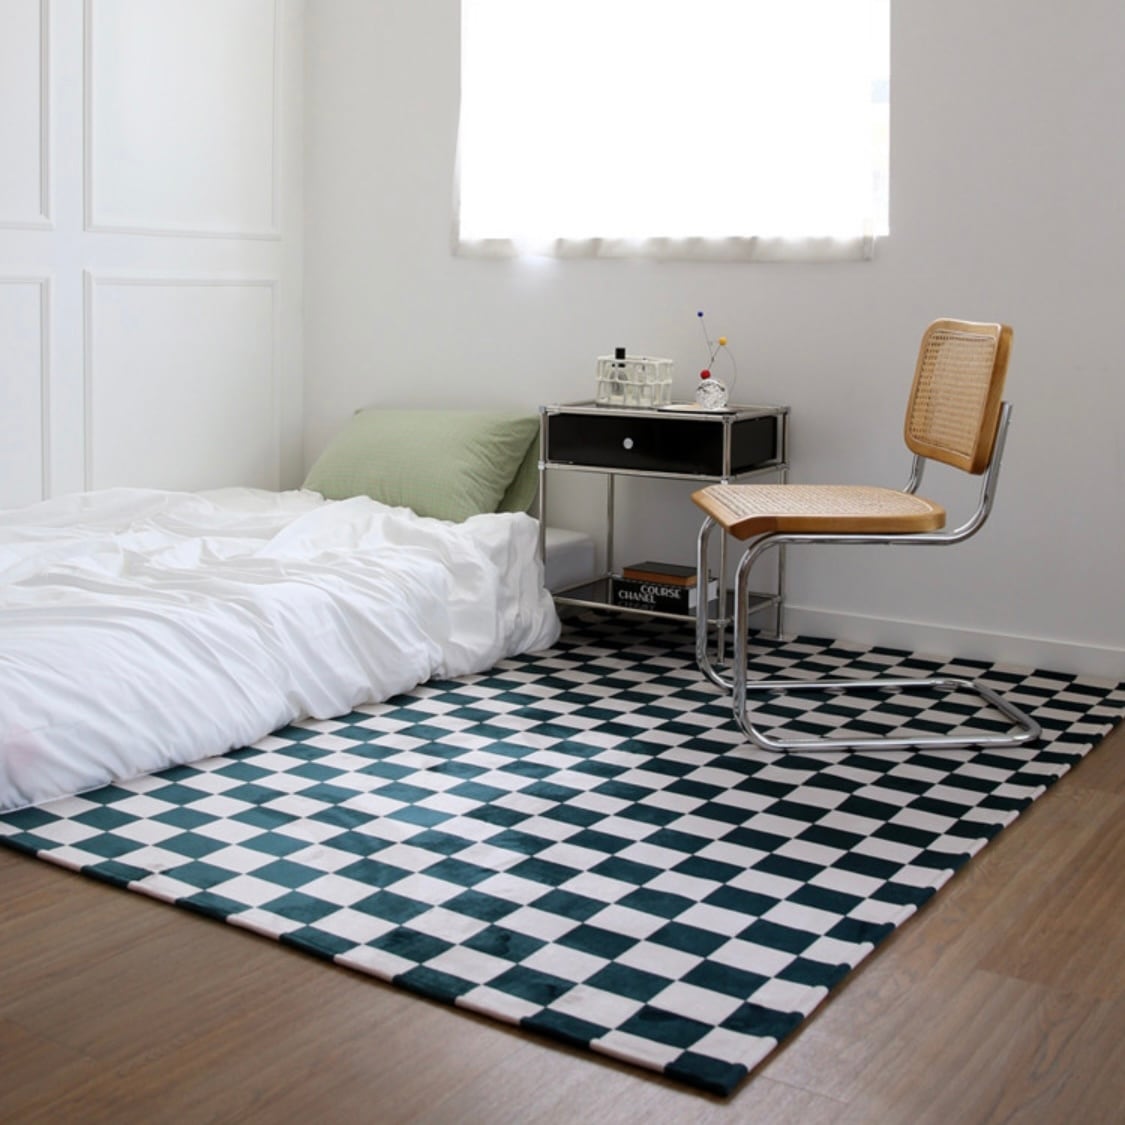 checkerboard rug 3size 2colors / チェッカーボード テェック ラグ カーペット 北欧 韓国インテリア